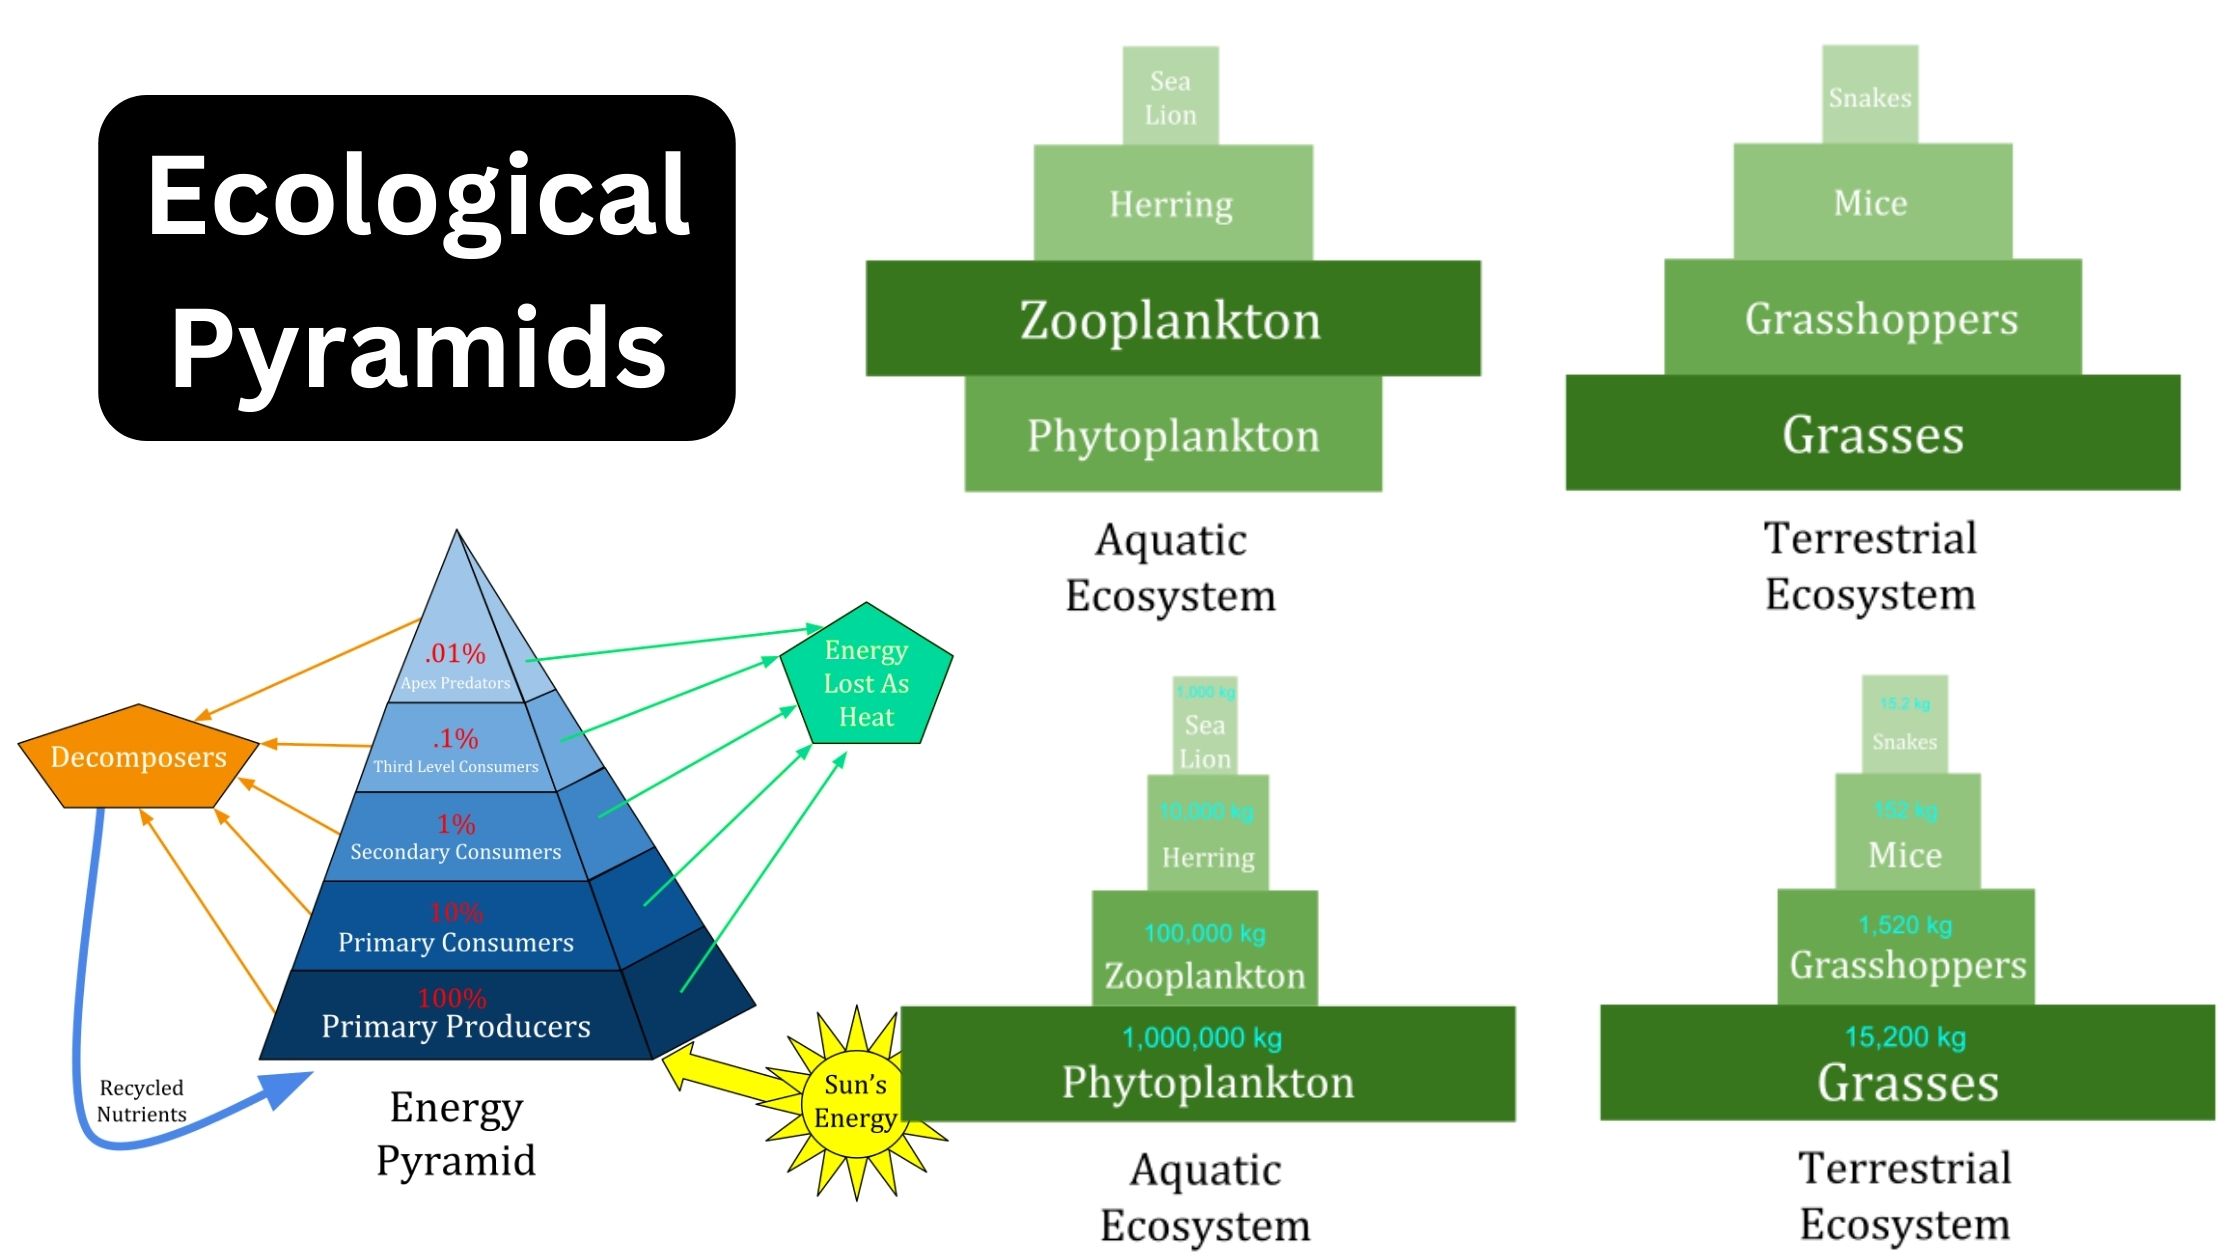 3 types of ecological pyramids